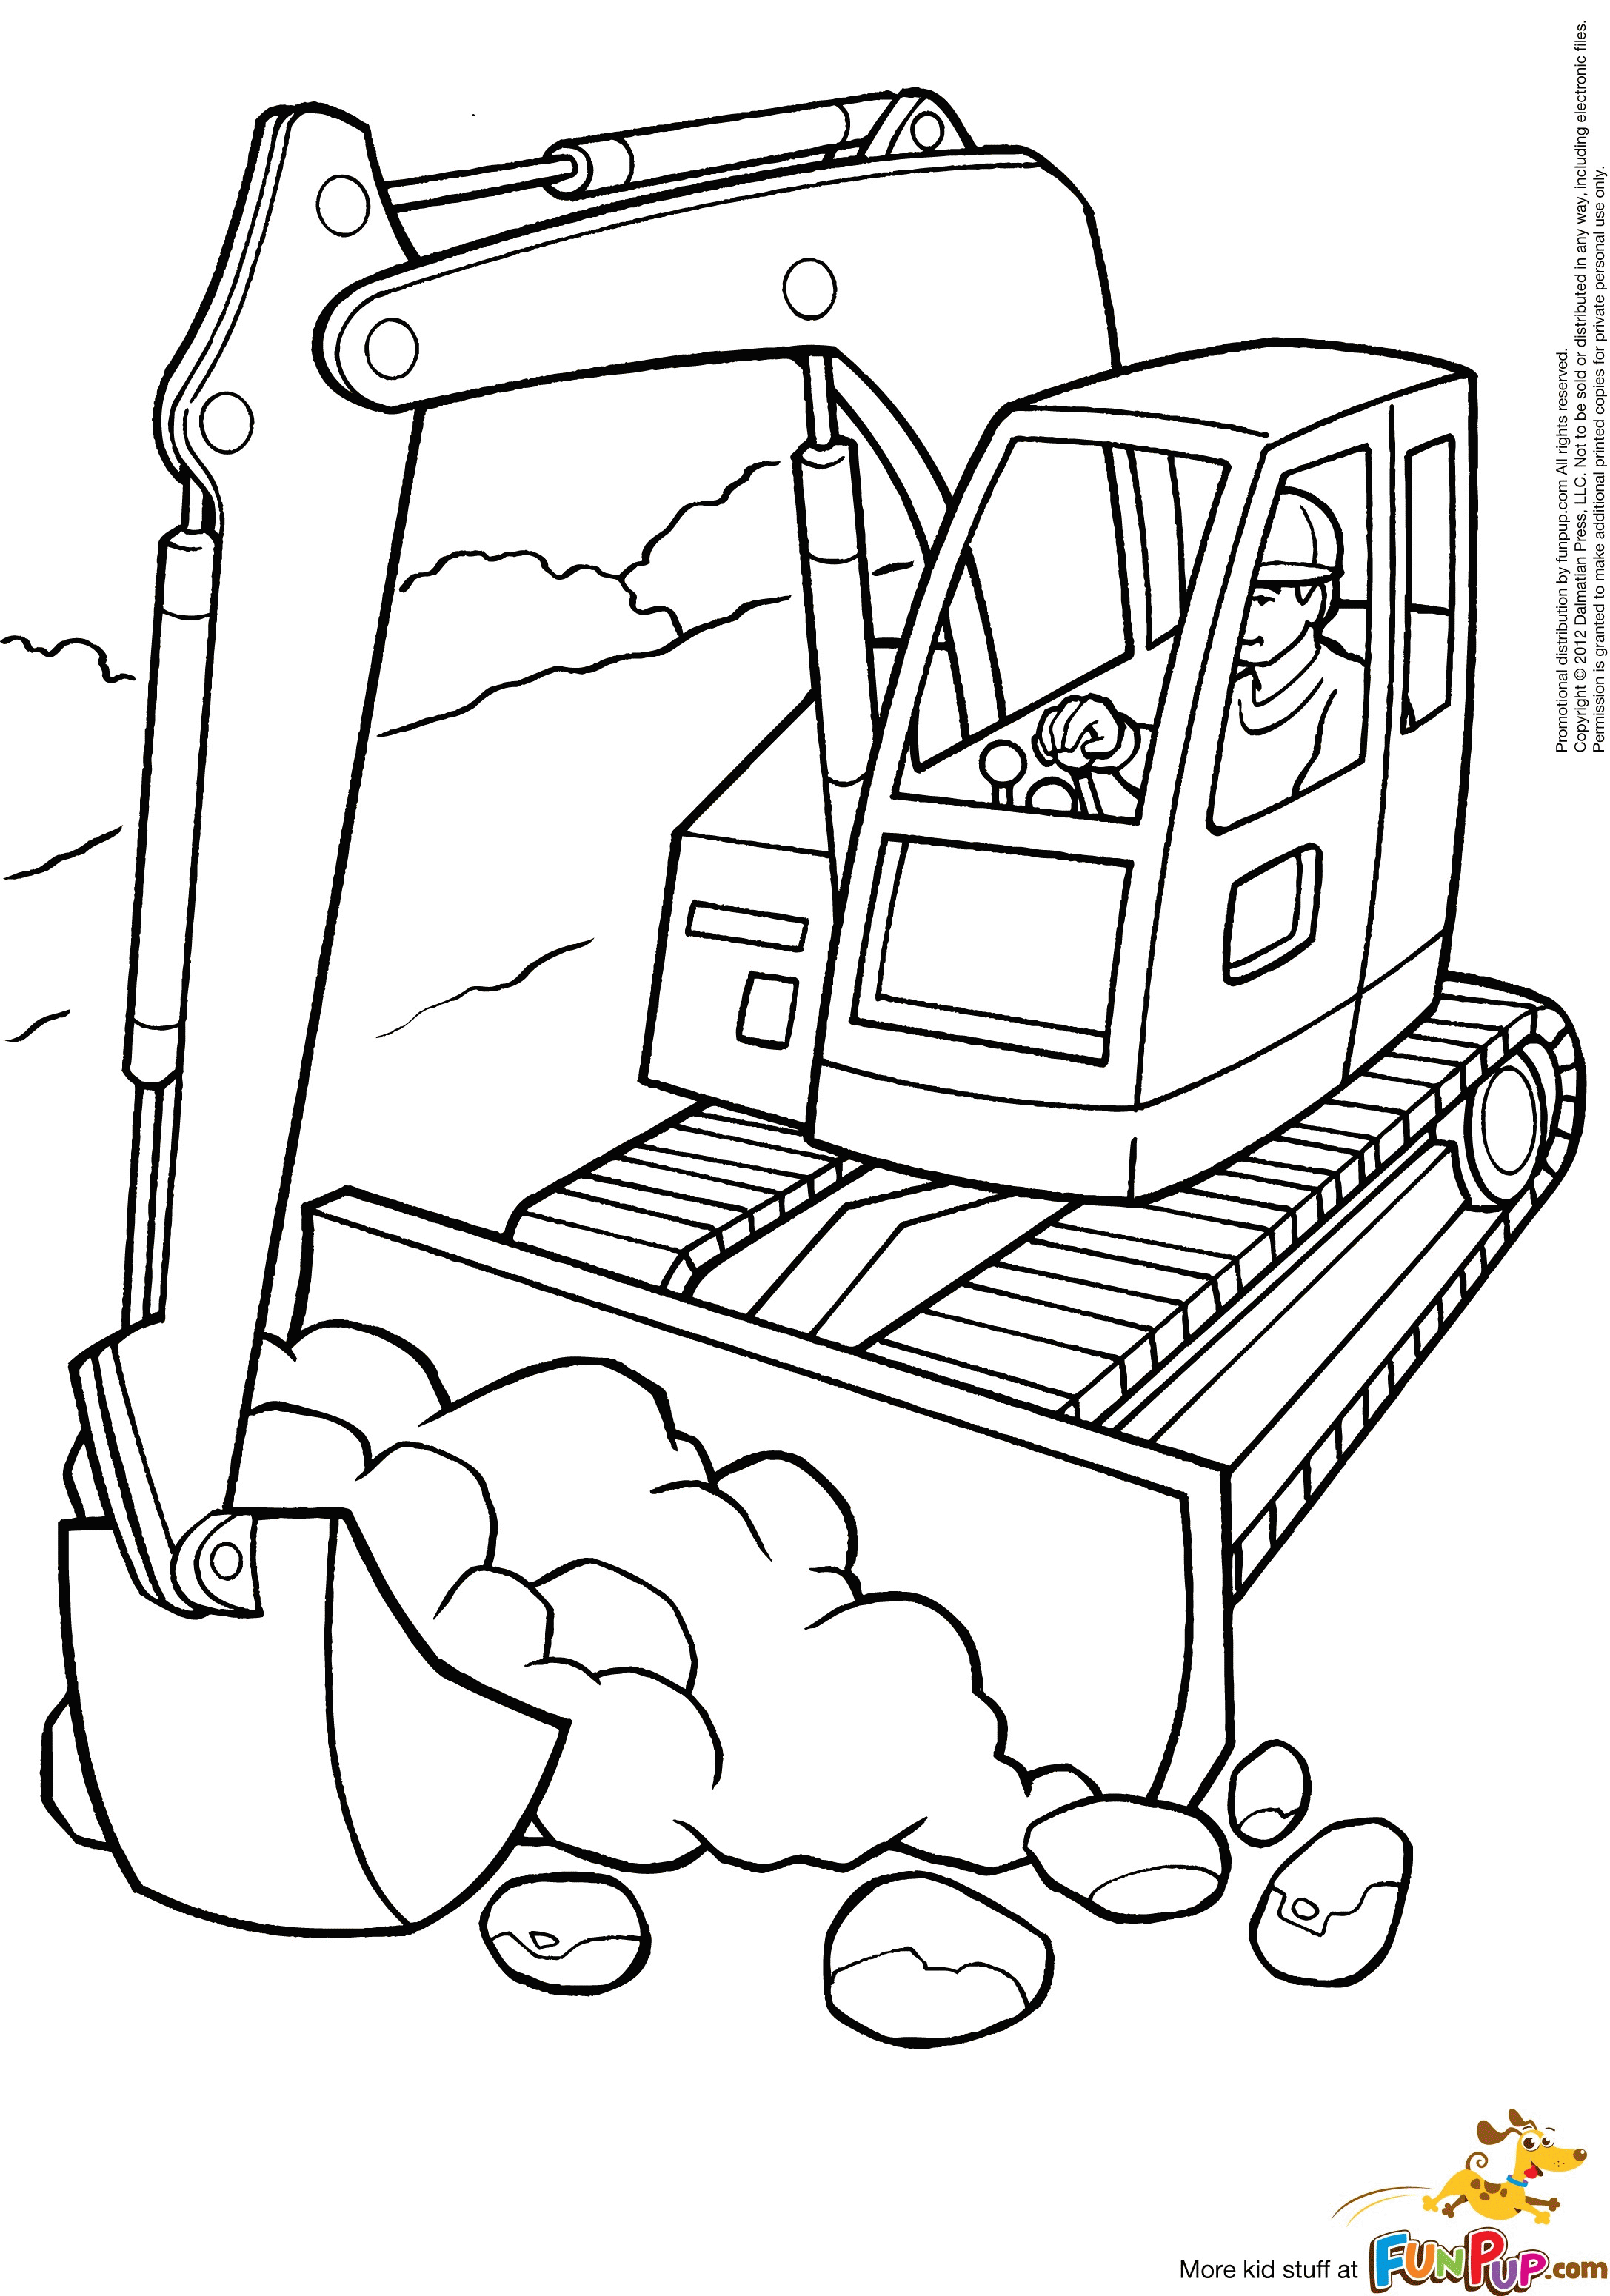 Construction Equipment Coloring Pages: equipment coloring pages